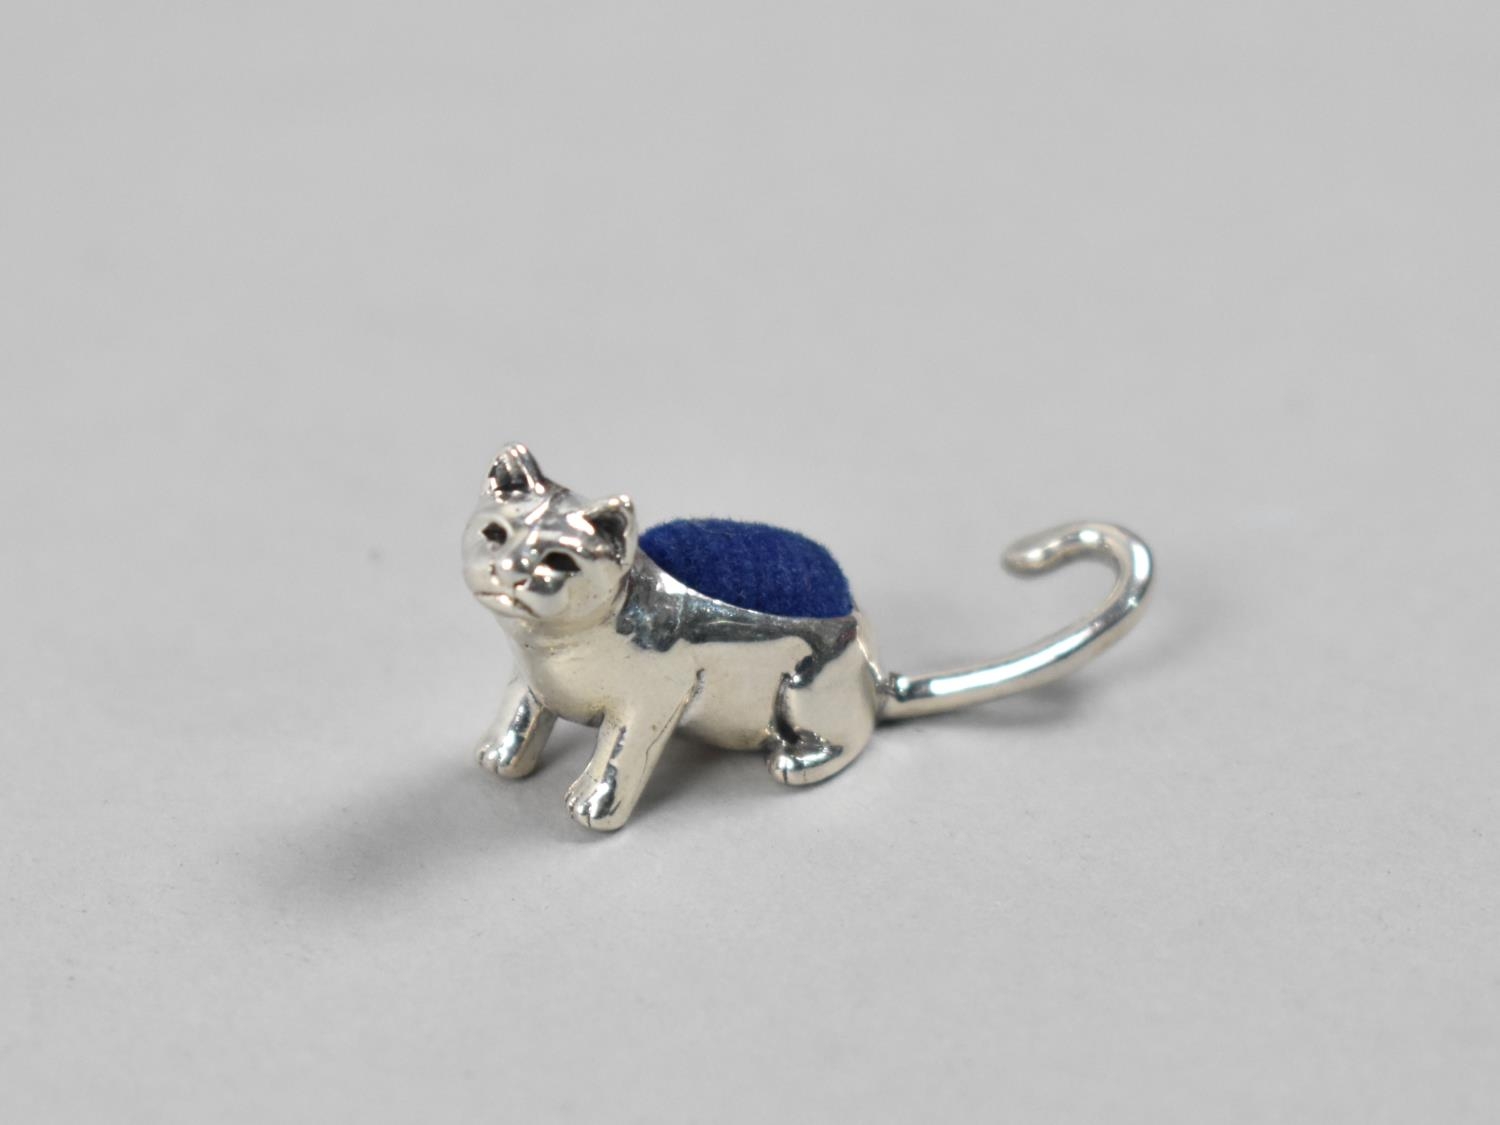 A Miniature Sterling Silver Pin Cushion Modelled as a Cat, 1.5cm high